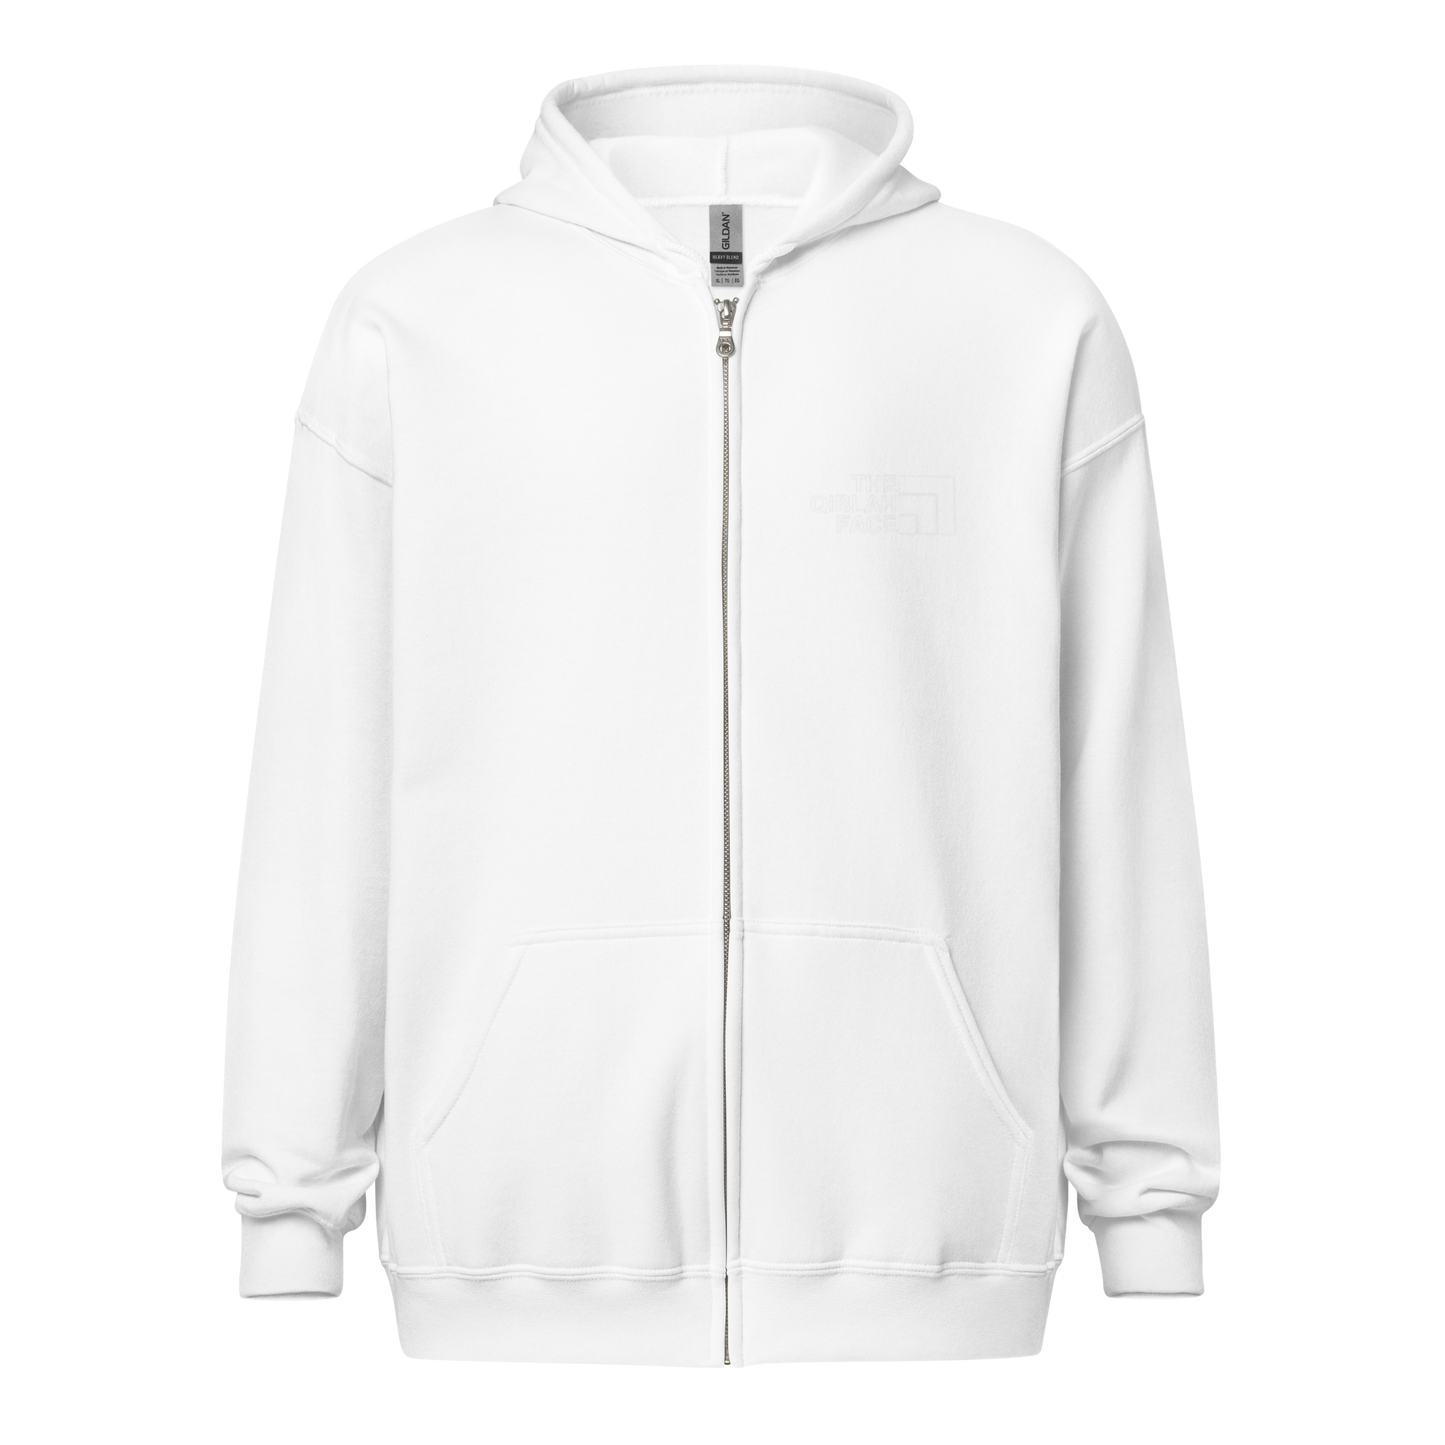 HOODIE Zip Heavy Blend (Adult) - THE QIBLAH FACE (Never Stop Praying - Back Logo) - White